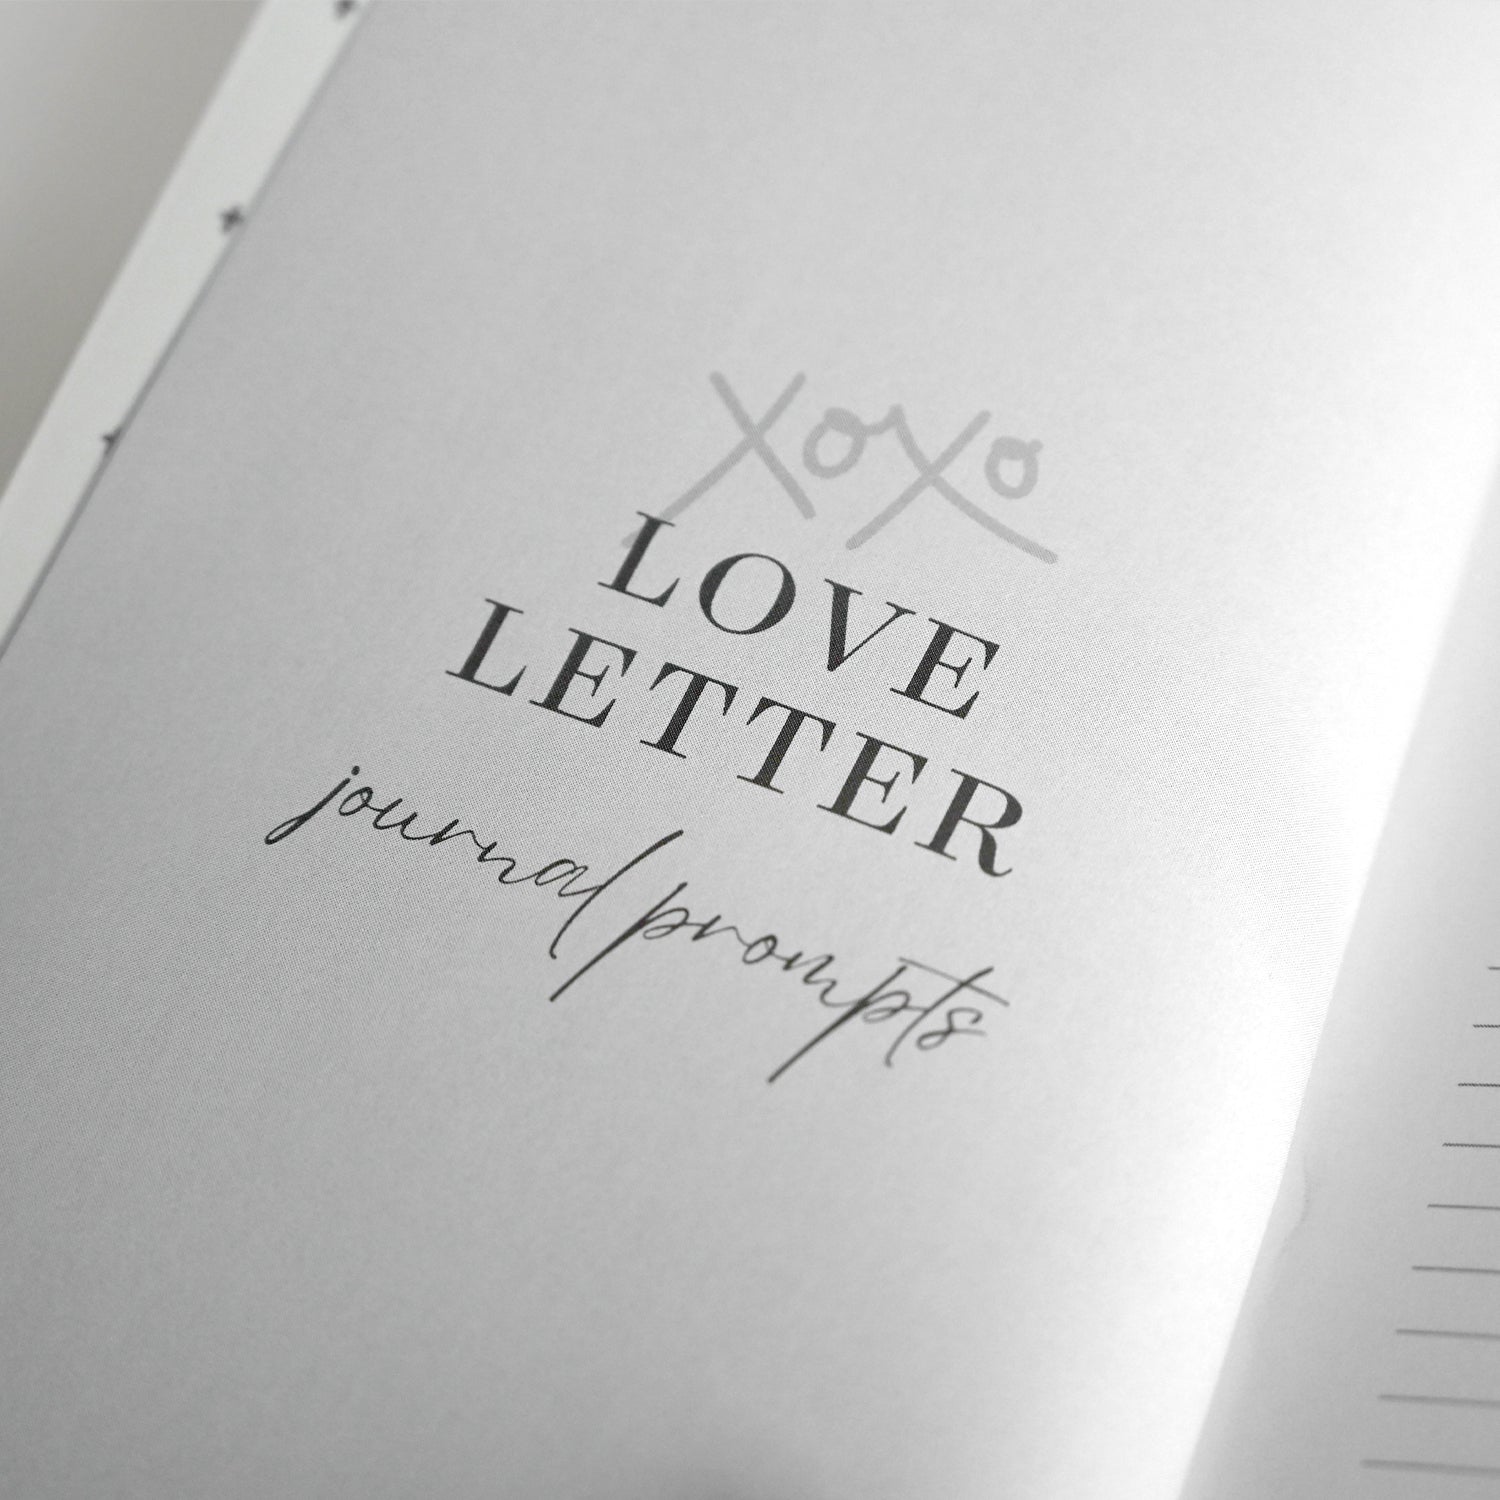 &quot;Letters To My Partner&quot; Couples Journal